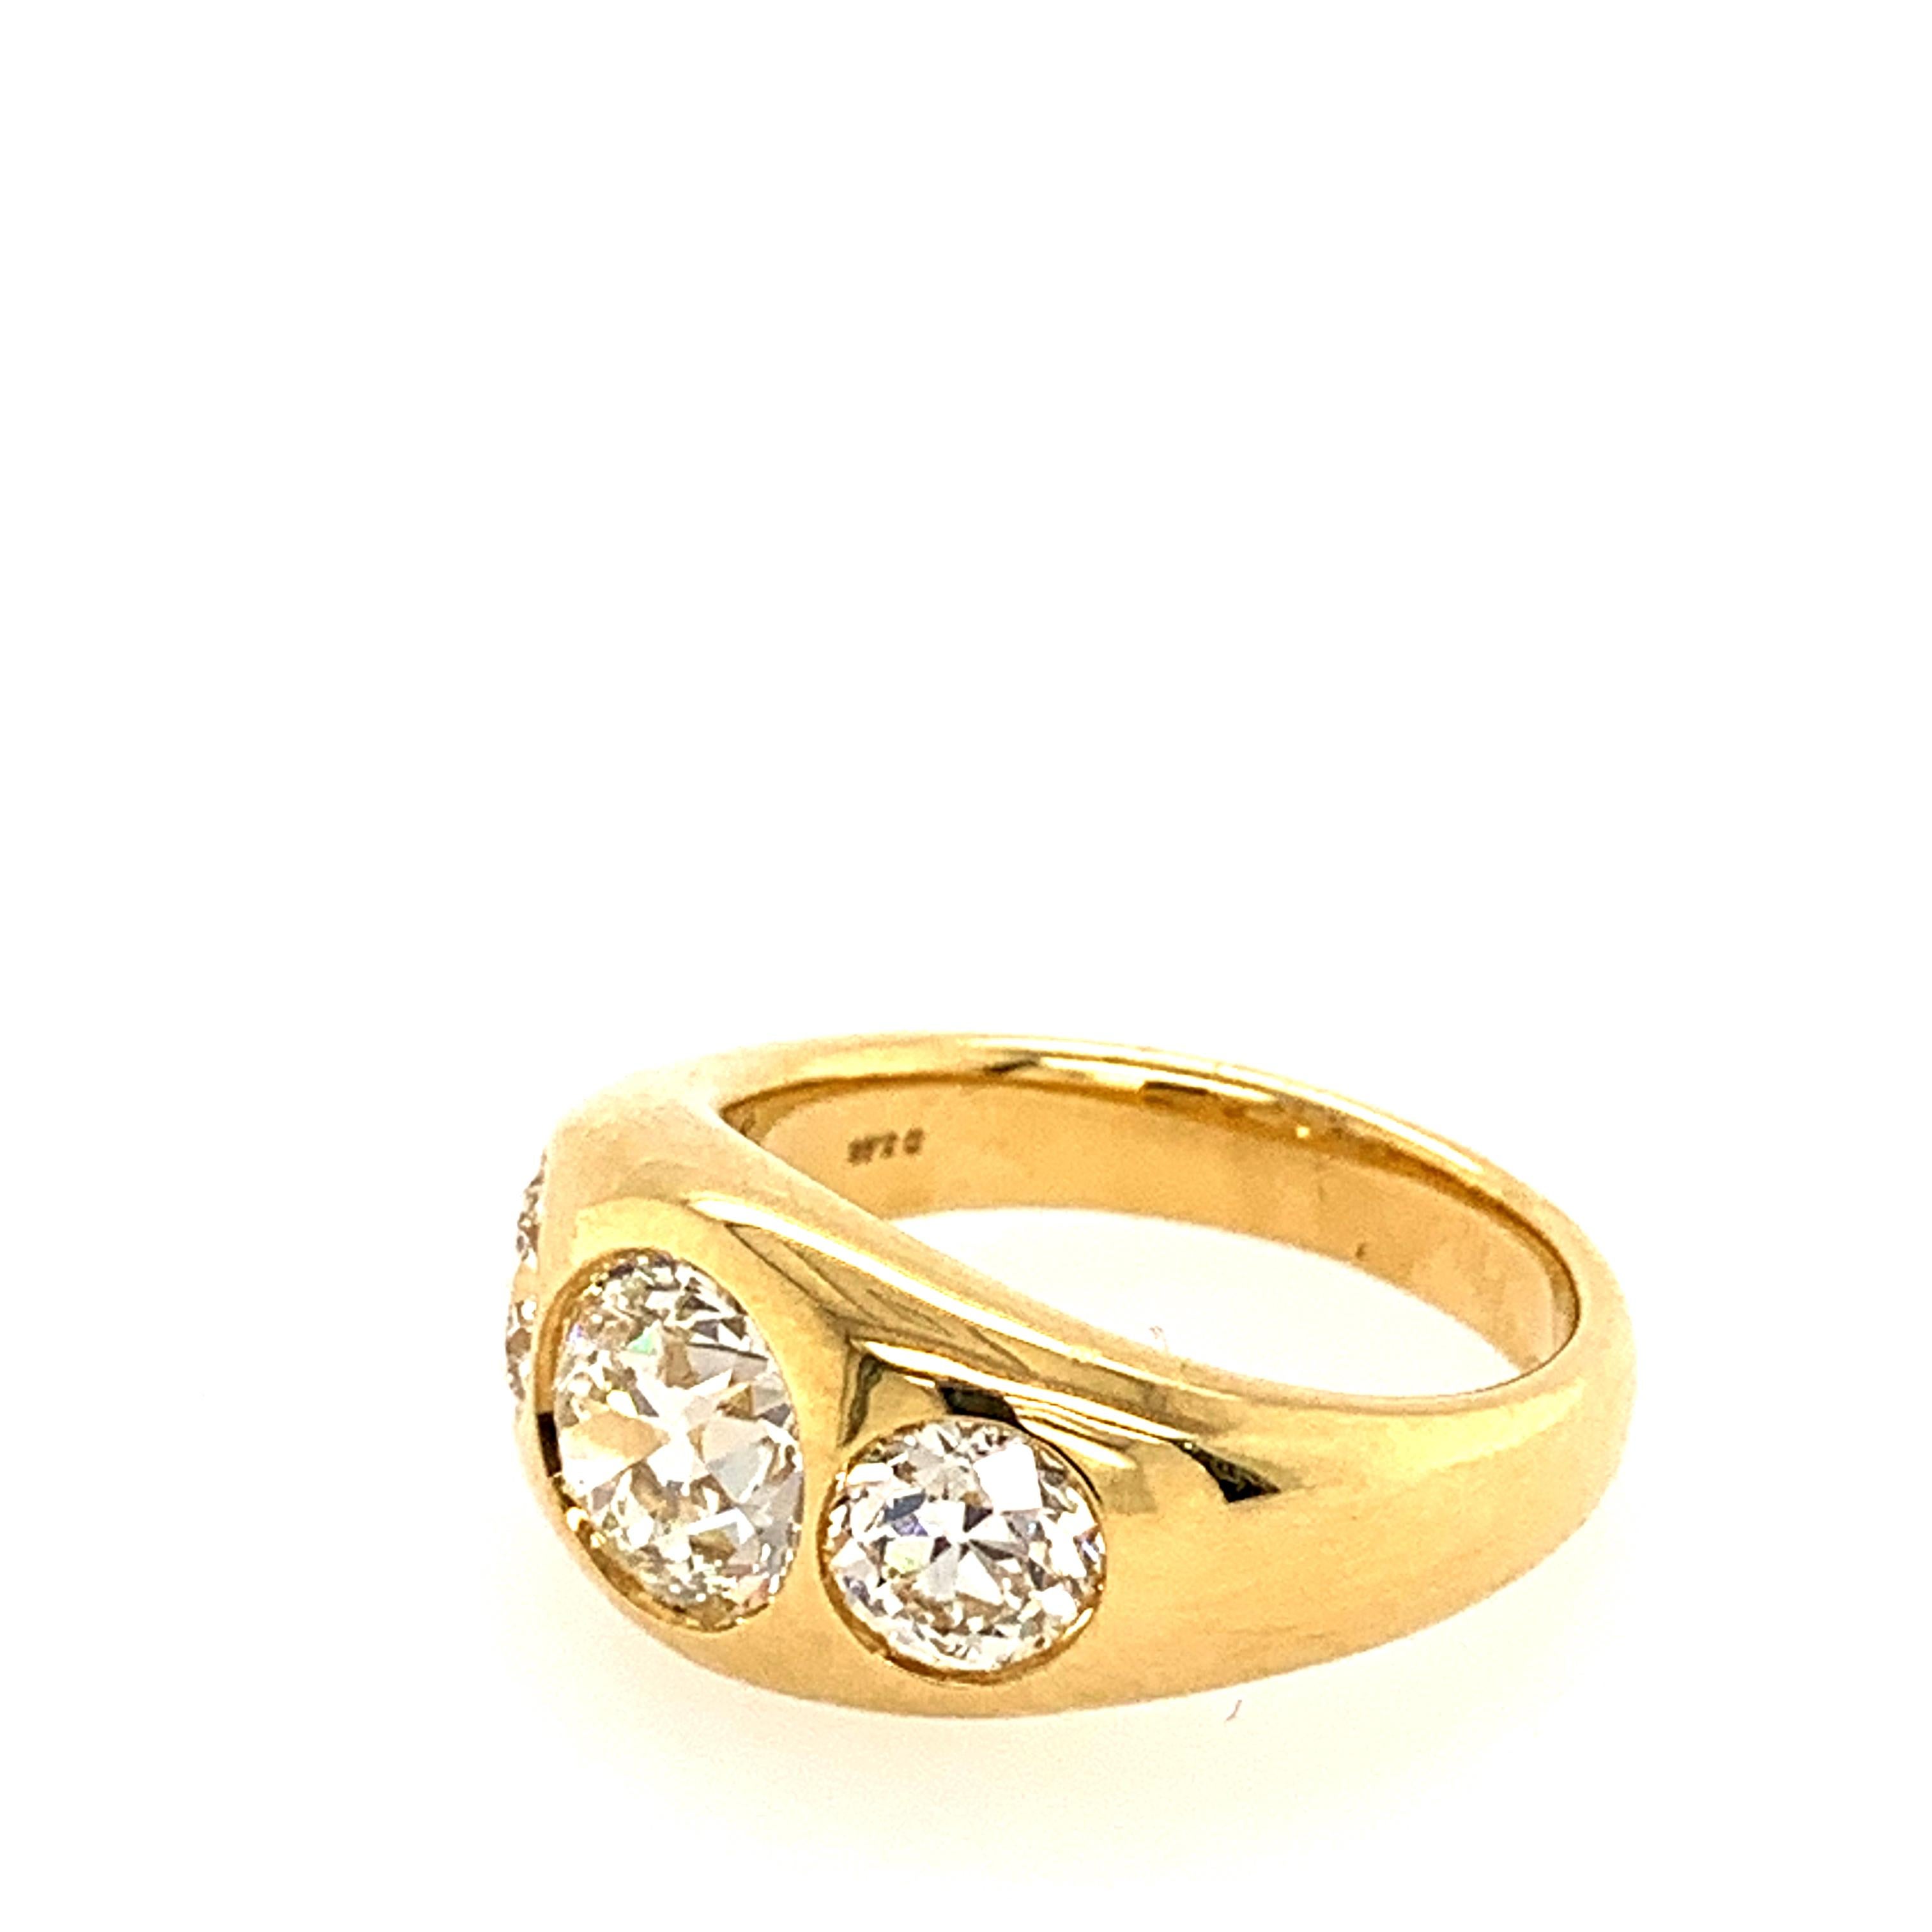 18 Karat Yellow Gold with center round diamond weighing 1.63 Carats and 2 round diamonds on the side weighing 0.44 carats and 0.39 carats.

Sophia D by Joseph Dardashti LTD has been known worldwide for 35 years and are inspired by classic Art Deco